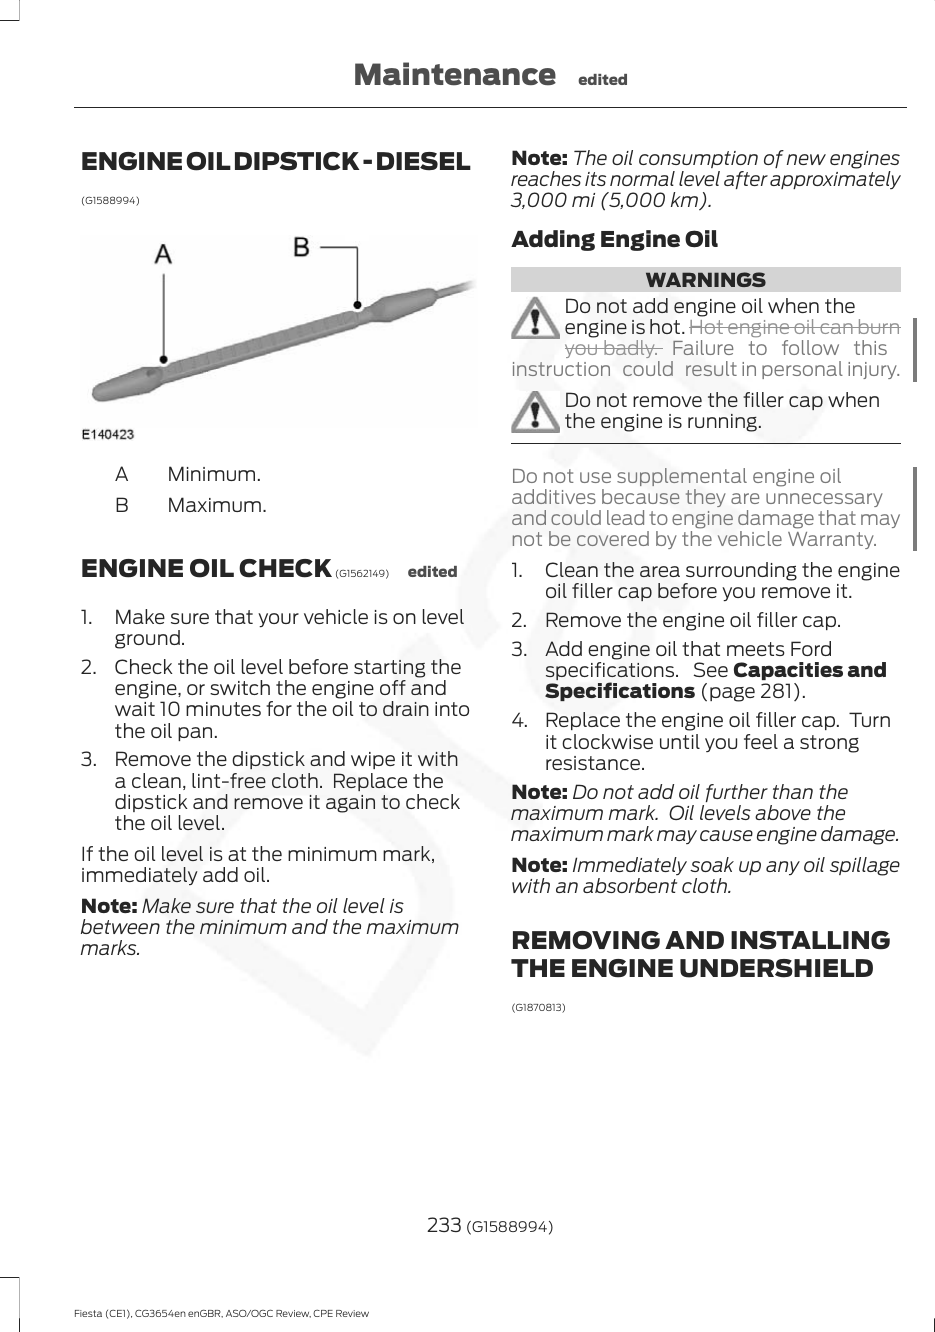 ENGINE OIL DIPSTICK - DIESEL(G1588994)Minimum.AMaximum.BENGINE OIL CHECK (G1562149) edited1. Make sure that your vehicle is on levelground.2. Check the oil level before starting theengine, or switch the engine off andwait 10 minutes for the oil to drain intothe oil pan.3. Remove the dipstick and wipe it witha clean, lint-free cloth.  Replace thedipstick and remove it again to checkthe oil level.If the oil level is at the minimum mark,immediately add oil.Note: Make sure that the oil level isbetween the minimum and the maximummarks.Note: The oil consumption of new enginesreaches its normal level after approximately3,000 mi (5,000 km).Adding Engine OilWARNINGSDo not add engine oil when theengine is hot. Hot engine oil can burnyou badly. Failure to follow thisinstruction  could  result in personal injury.Do not remove the filler cap whenthe engine is running.Do not use supplemental engine oiladditives because they are unnecessaryand could lead to engine damage that maynot be covered by the vehicle Warranty.1. Clean the area surrounding the engineoil filler cap before you remove it.2. Remove the engine oil filler cap.3. Add engine oil that meets Fordspecifications.  See Capacities andSpecifications (page 281).4. Replace the engine oil filler cap.  Turnit clockwise until you feel a strongresistance.Note: Do not add oil further than themaximum mark.  Oil levels above themaximum mark may cause engine damage.Note: Immediately soak up any oil spillagewith an absorbent cloth.REMOVING AND INSTALLINGTHE ENGINE UNDERSHIELD(G1870813)233 (G1588994)Fiesta (CE1), CG3654en enGBR, ASO/OGC Review, CPE ReviewMaintenance edited